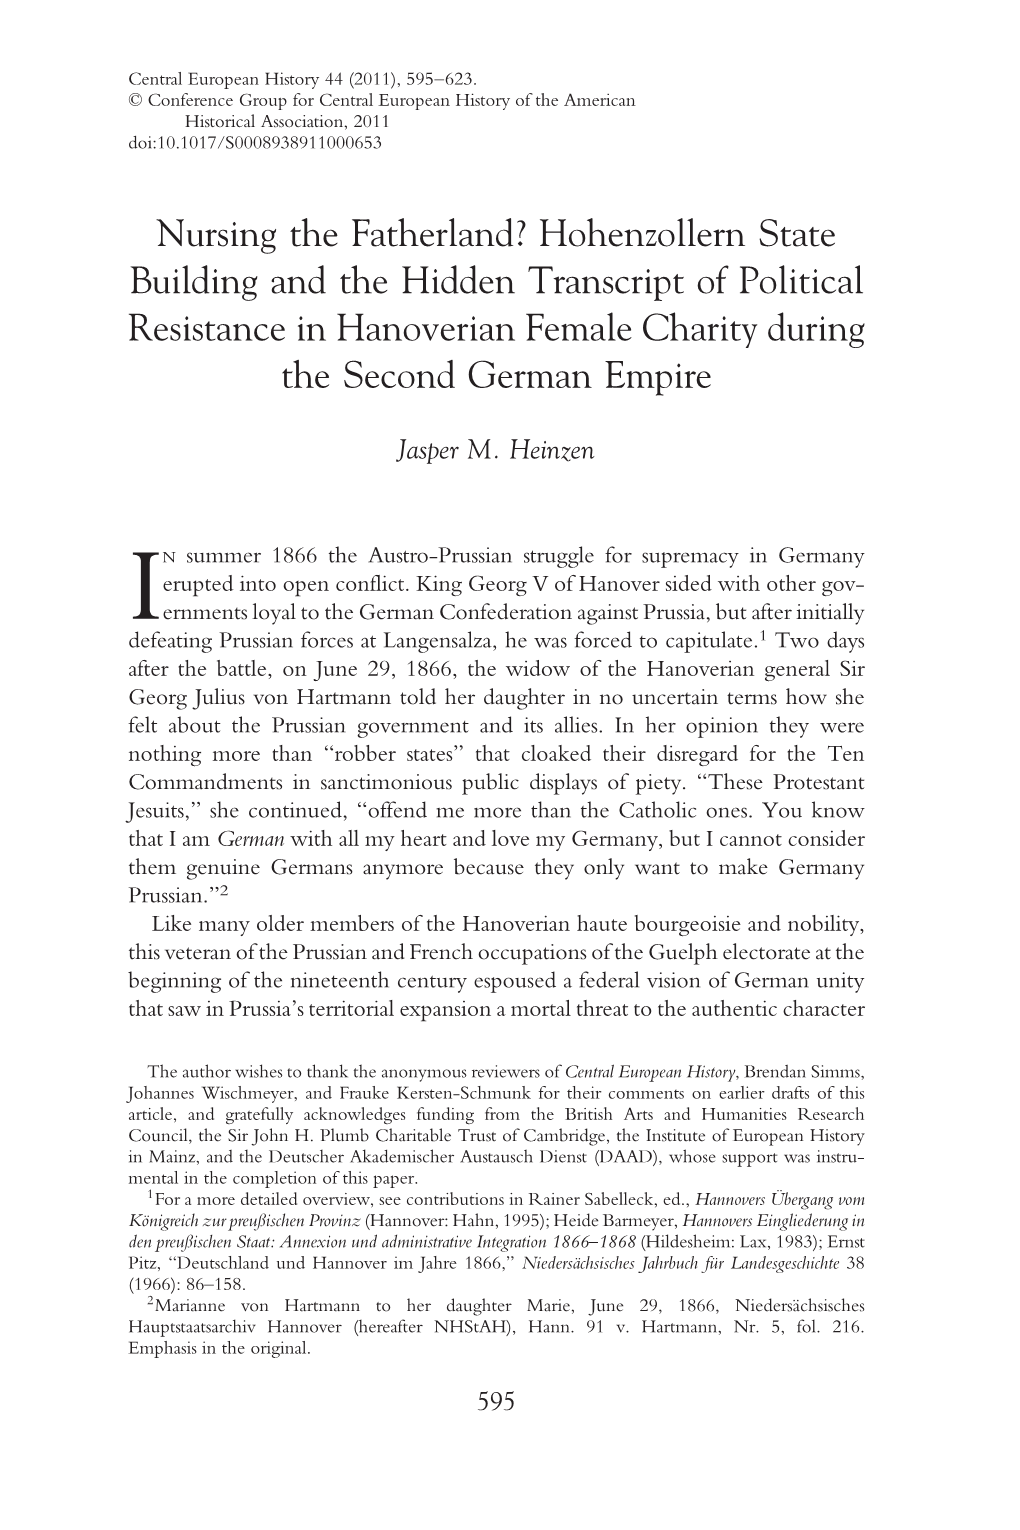 Hohenzollern State Building and the Hidden Transcript of Political Resistance in Hanoverian Female Charity During the Second German Empire